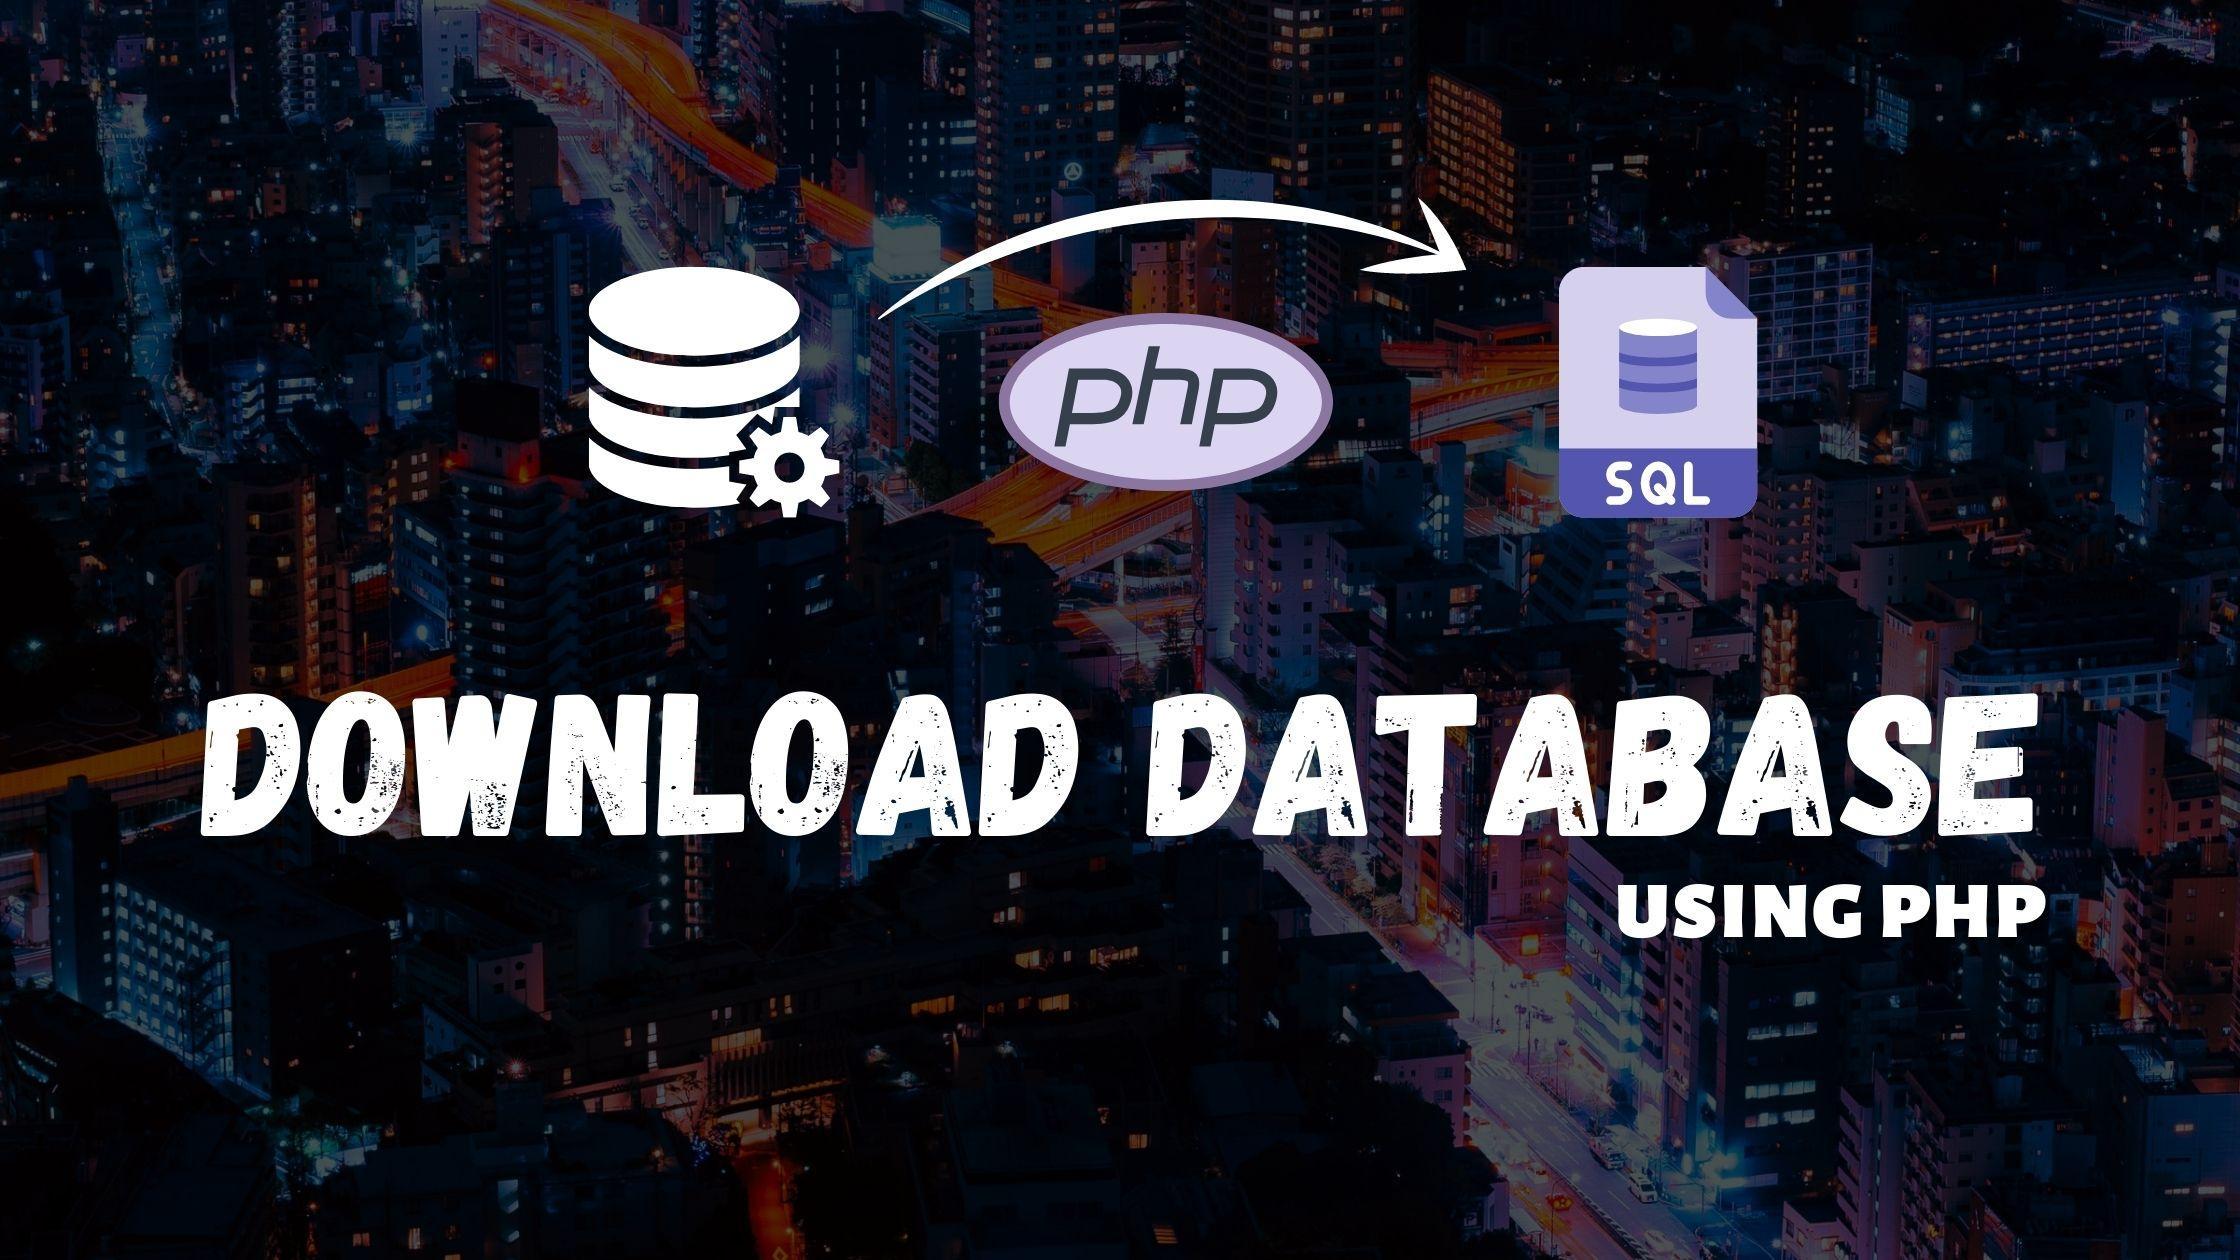 How to backup and download Database using PHP